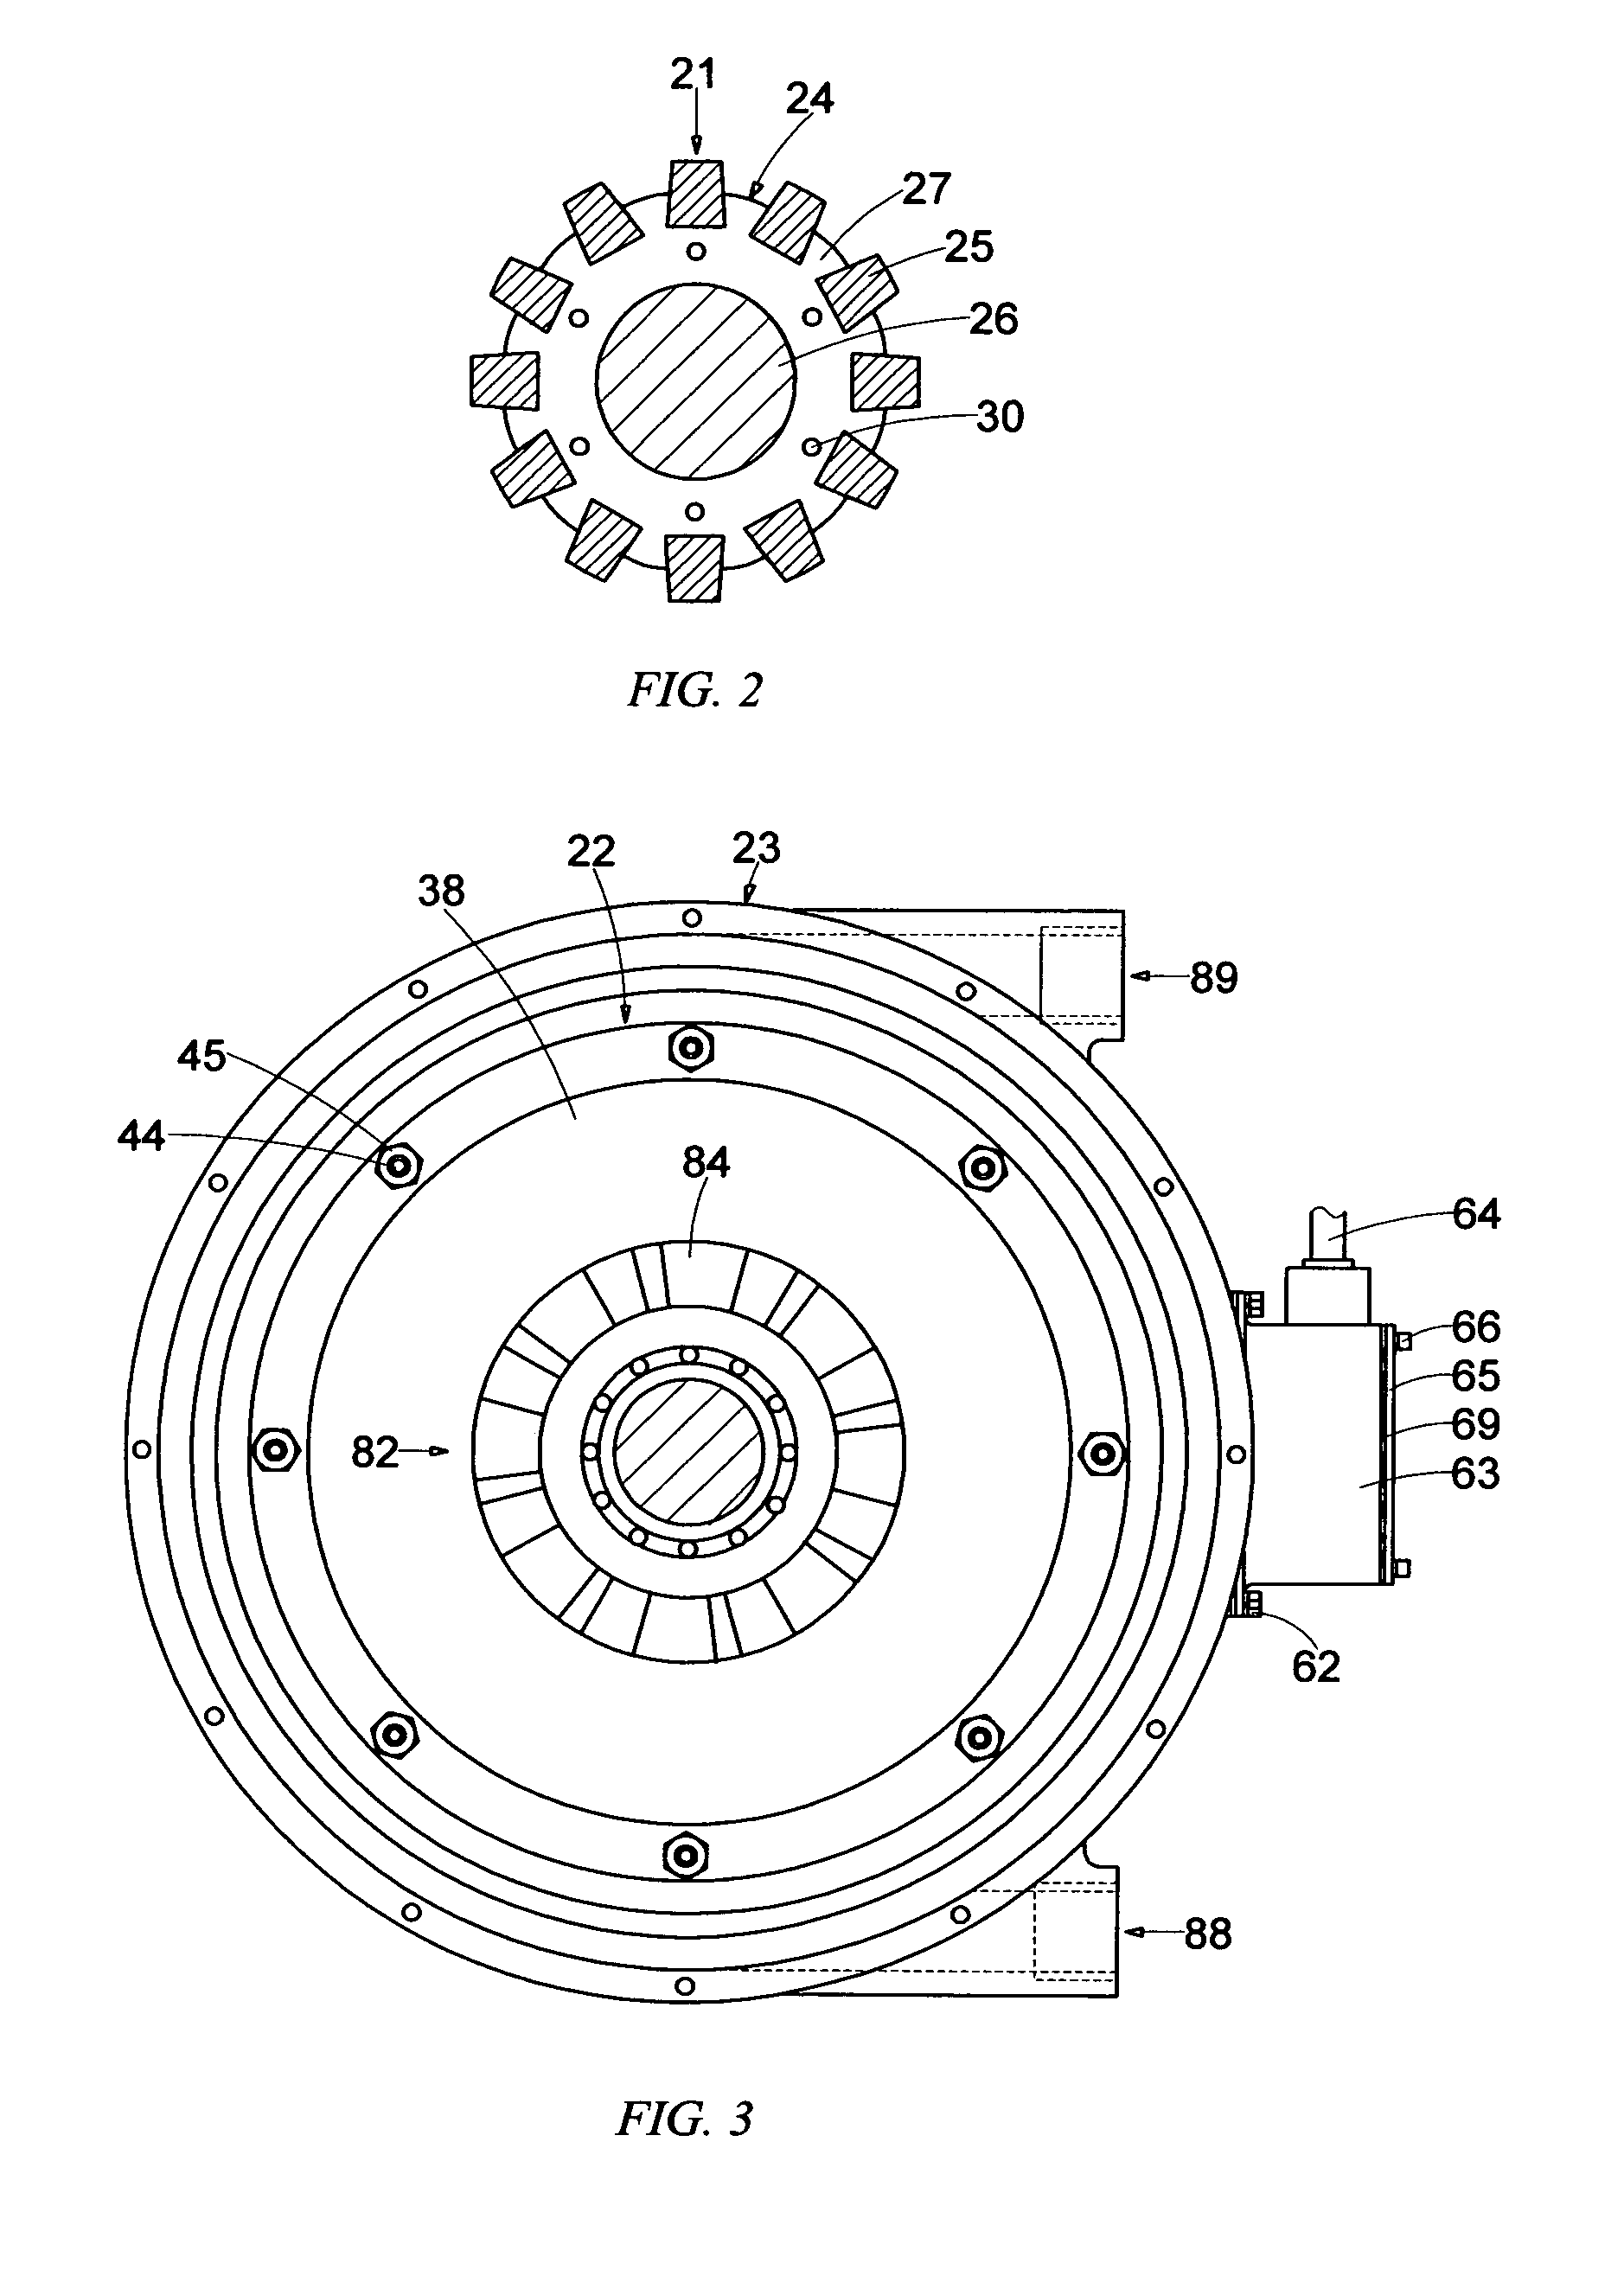 Dual-rotor electric traction motor